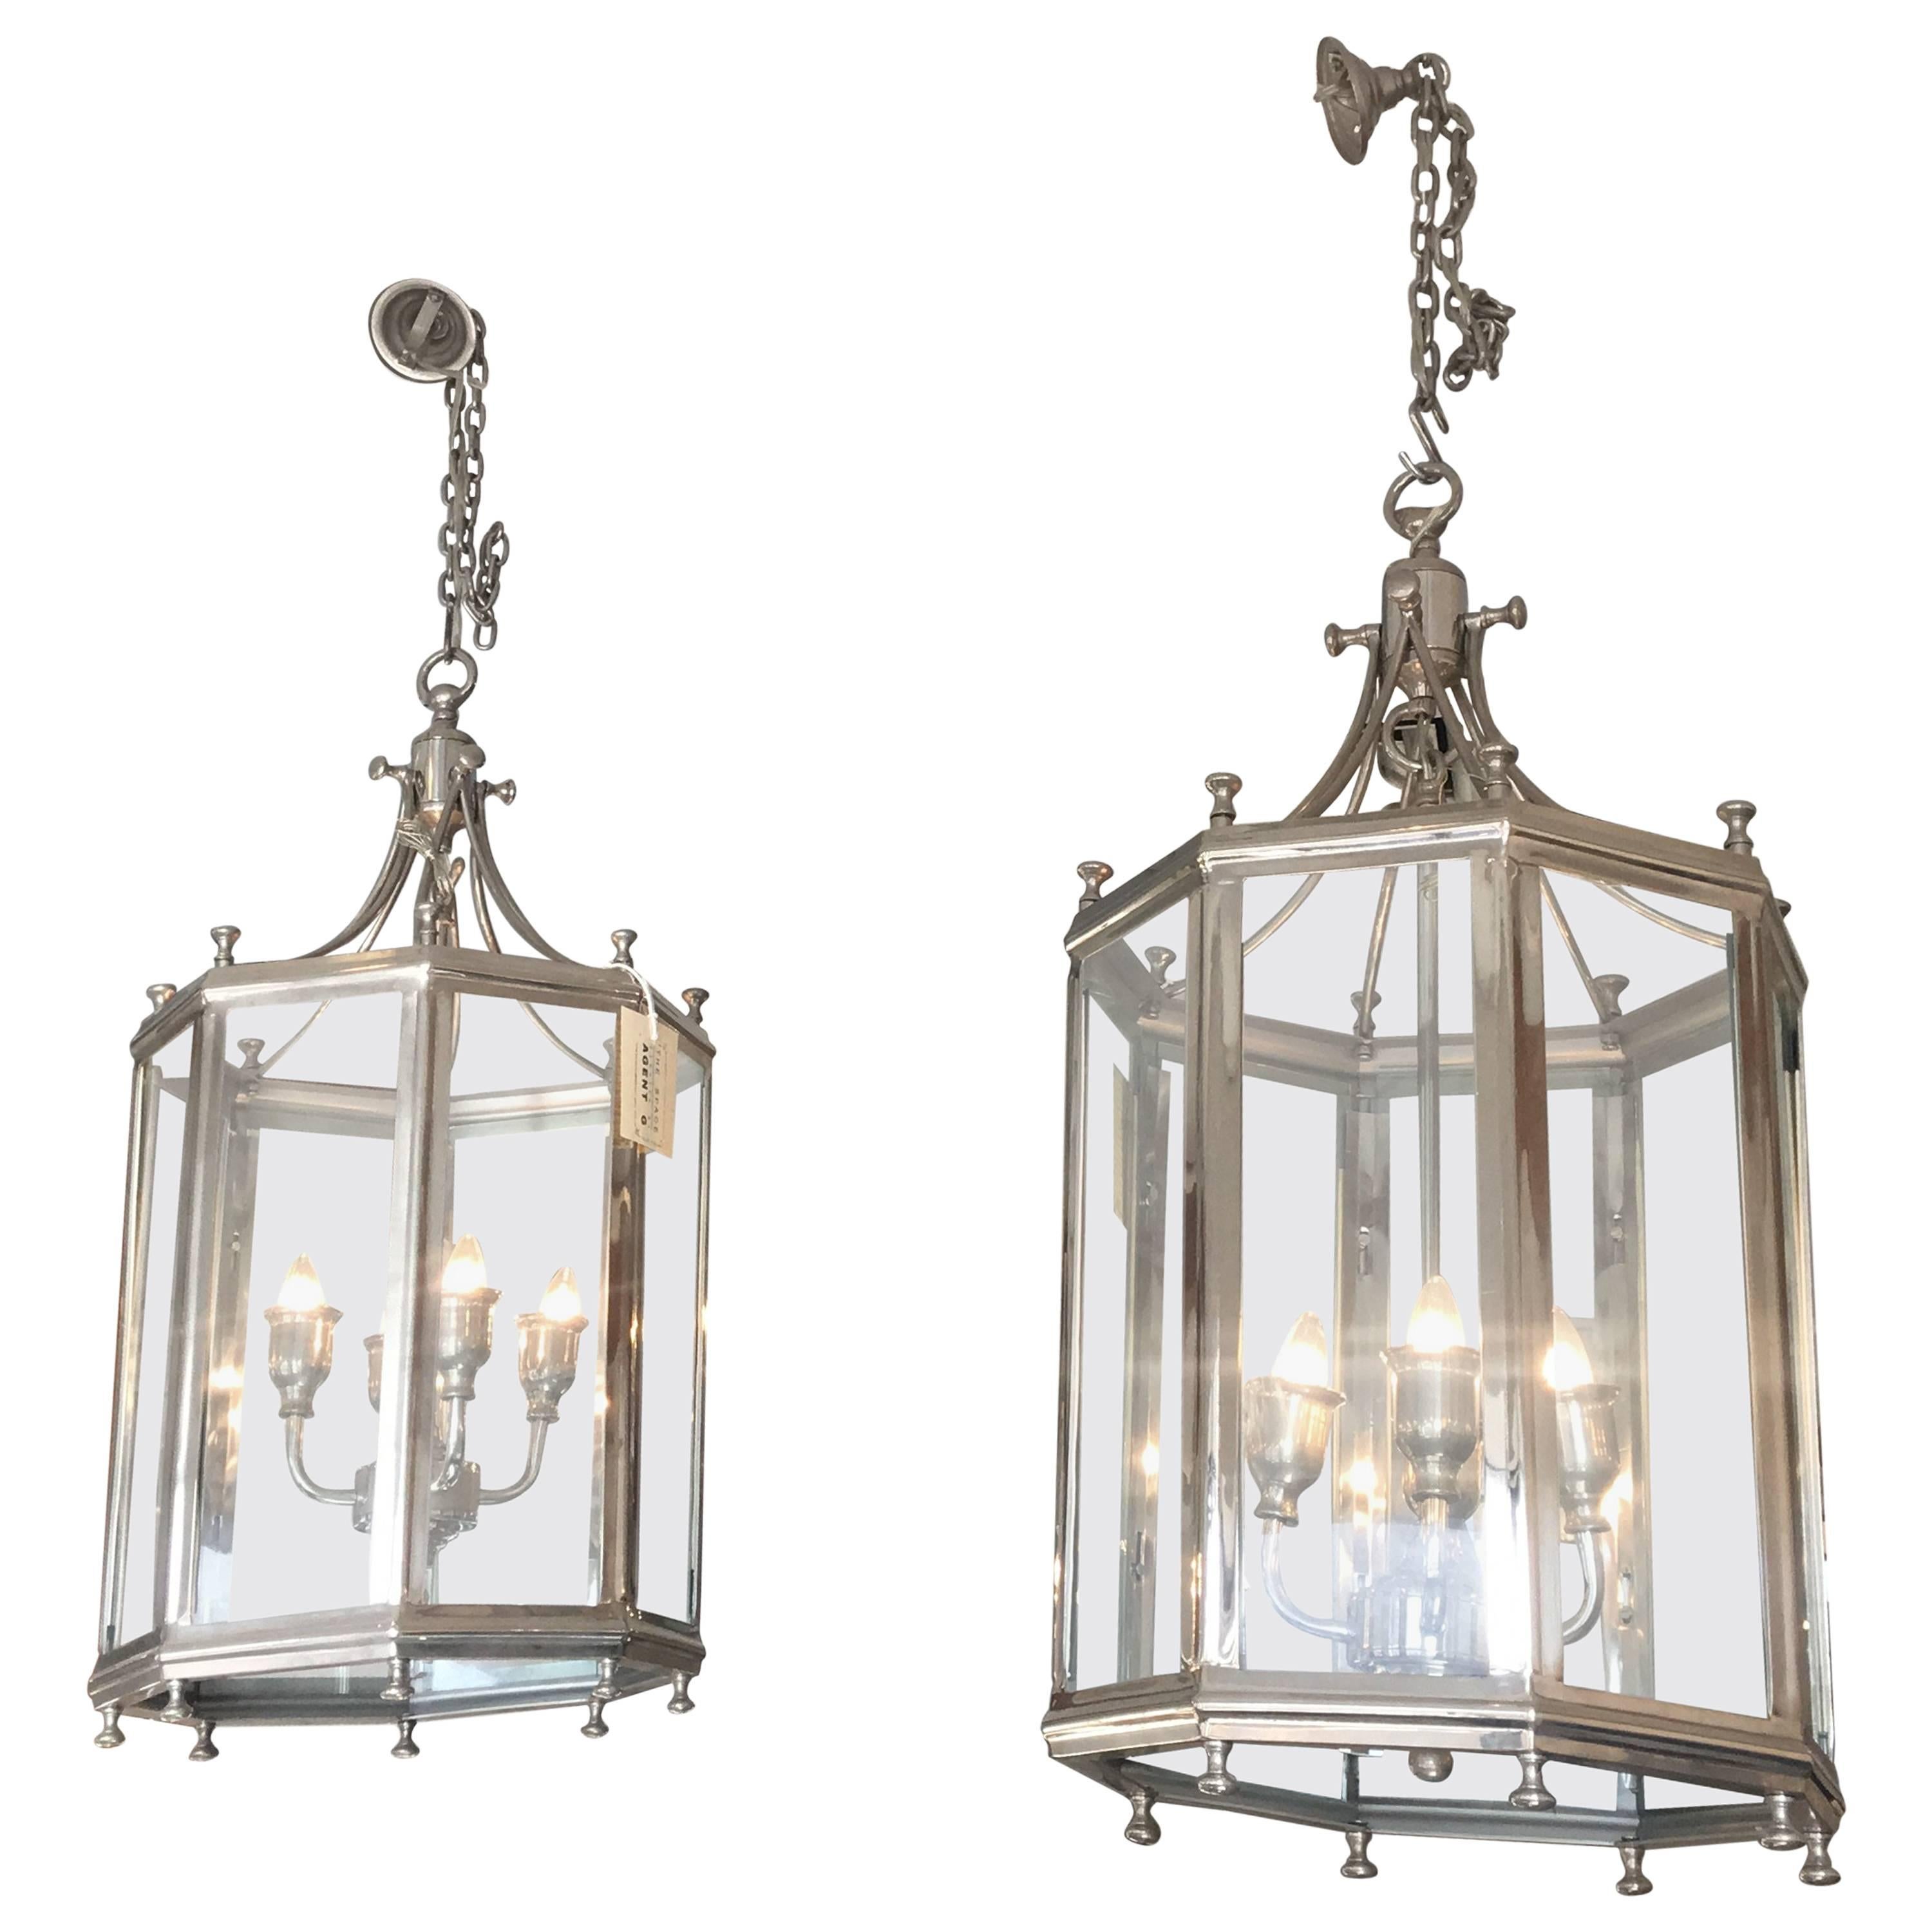 Pair of Lantern Chandeliers For Sale